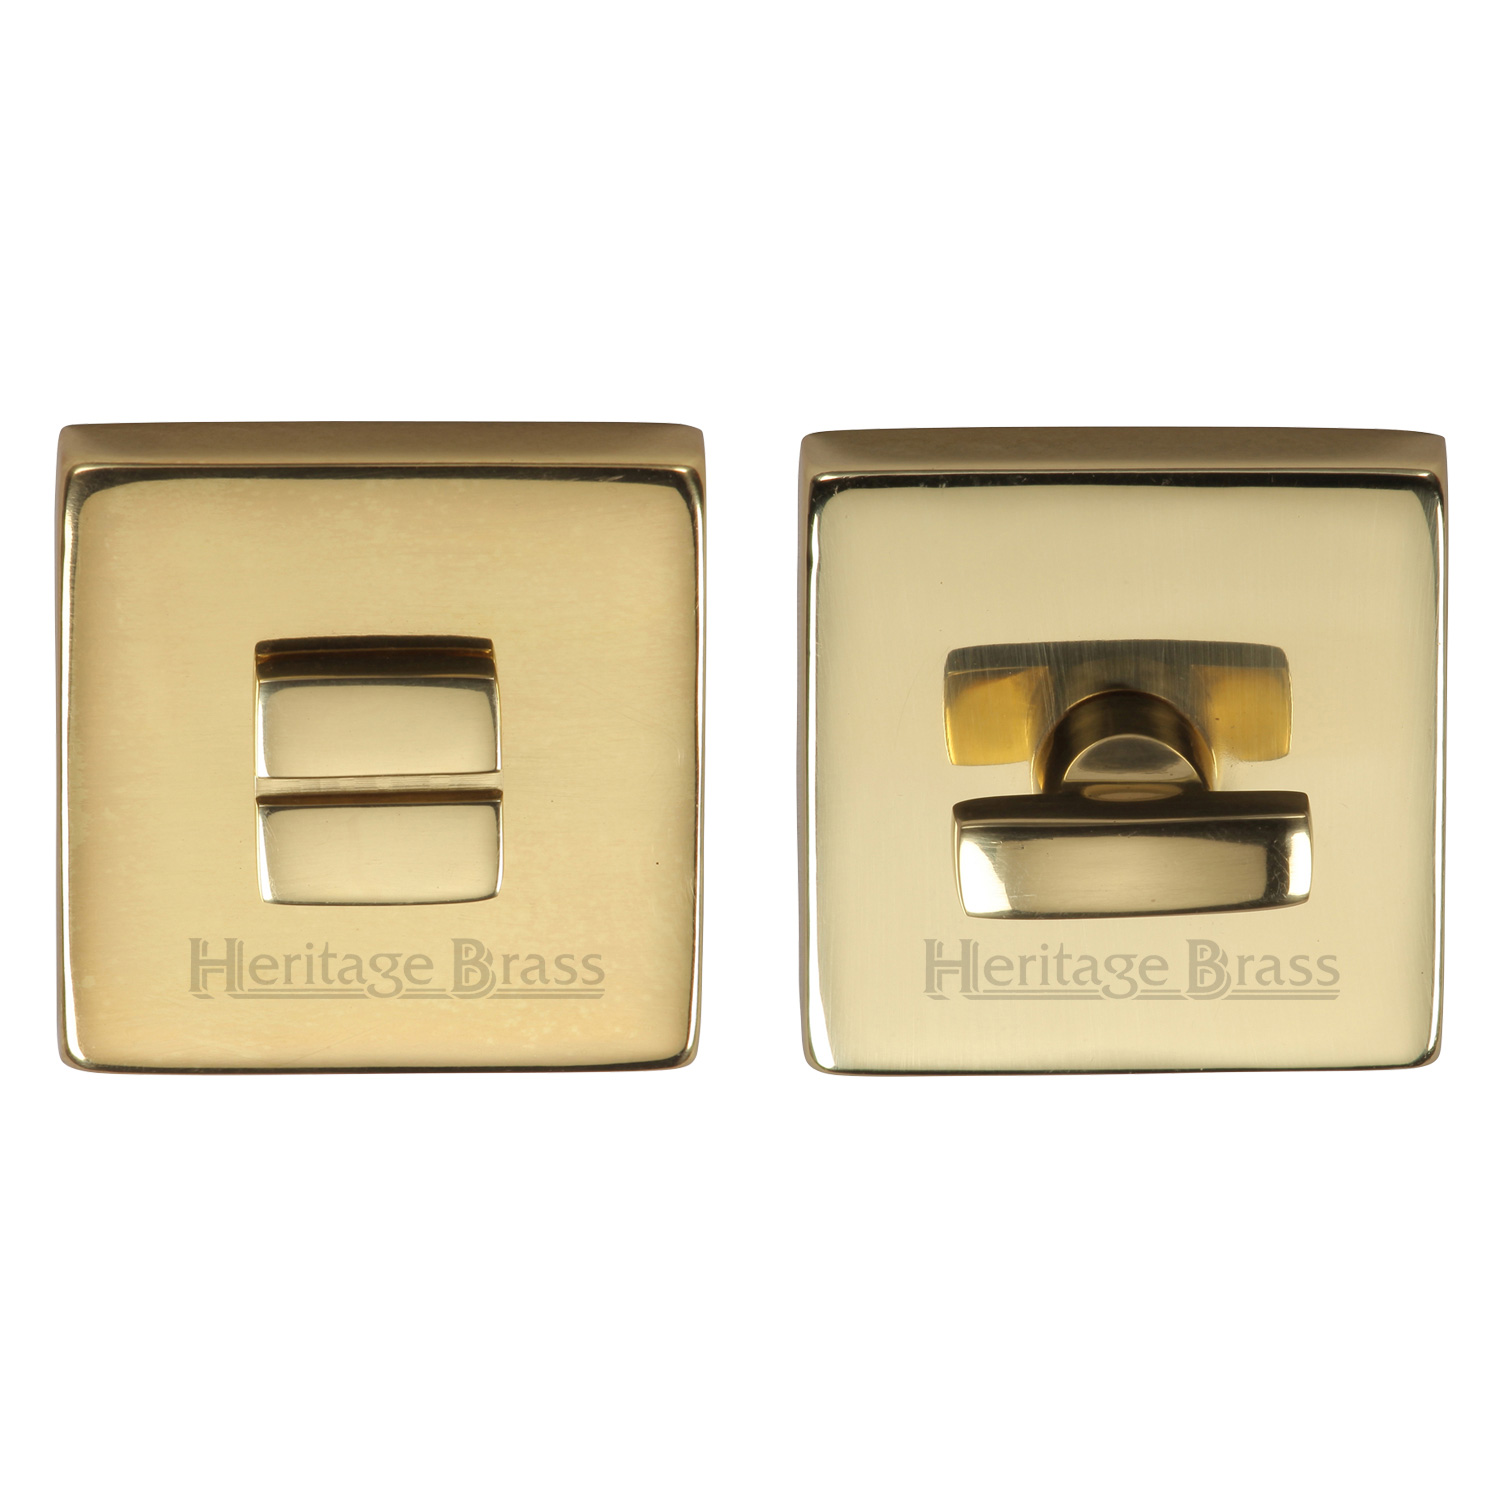 Heritage Brass Square Thumbturn & Emergency Release